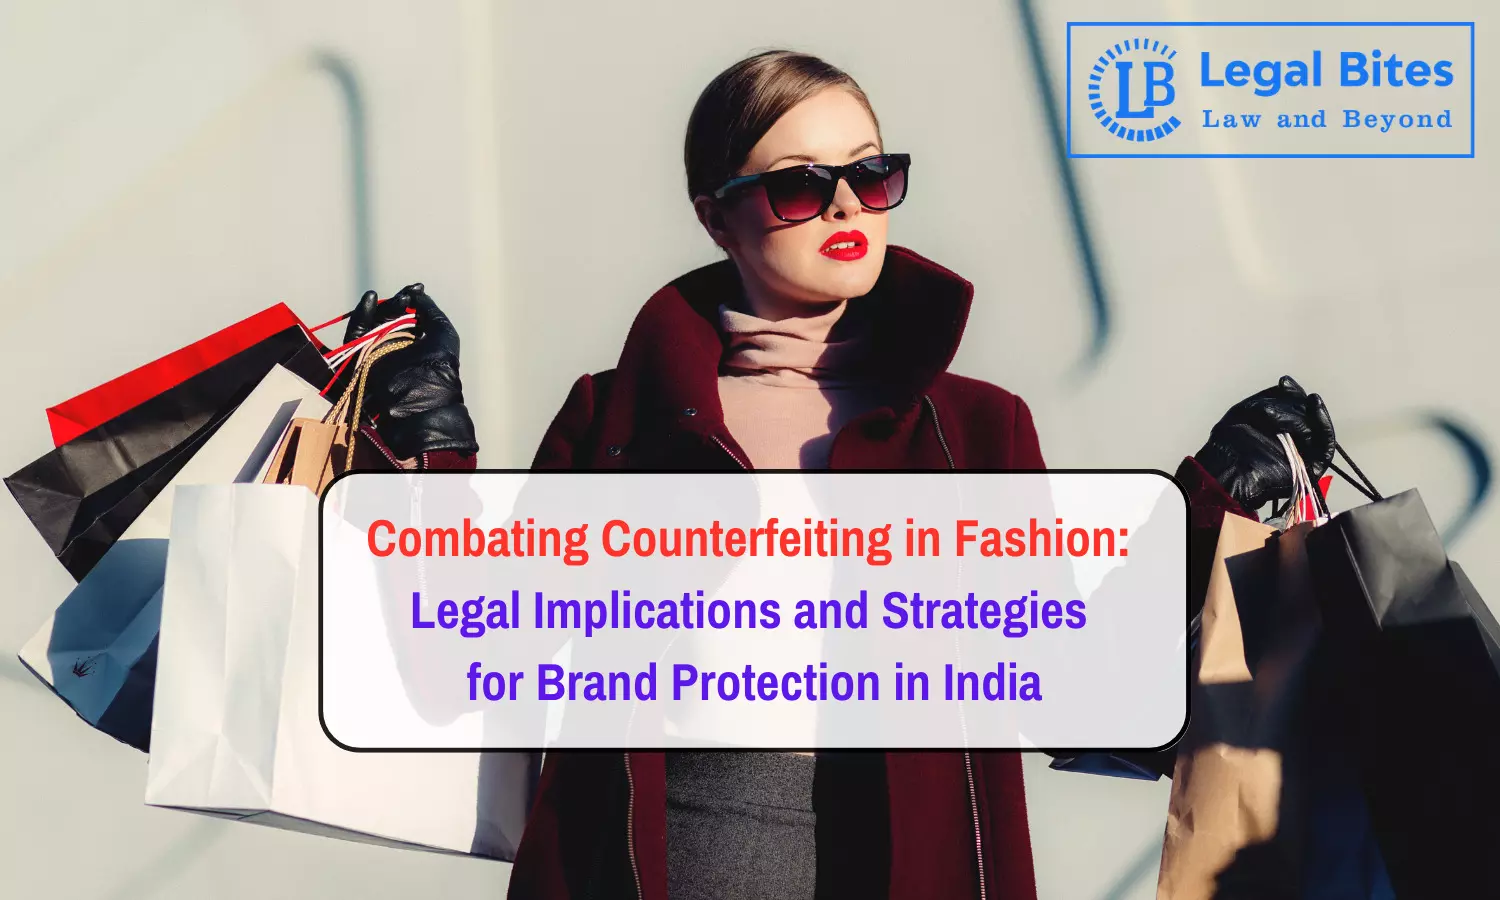 Combating Counterfeiting in Fashion: Legal Implications and Strategies for Brand Protection in India